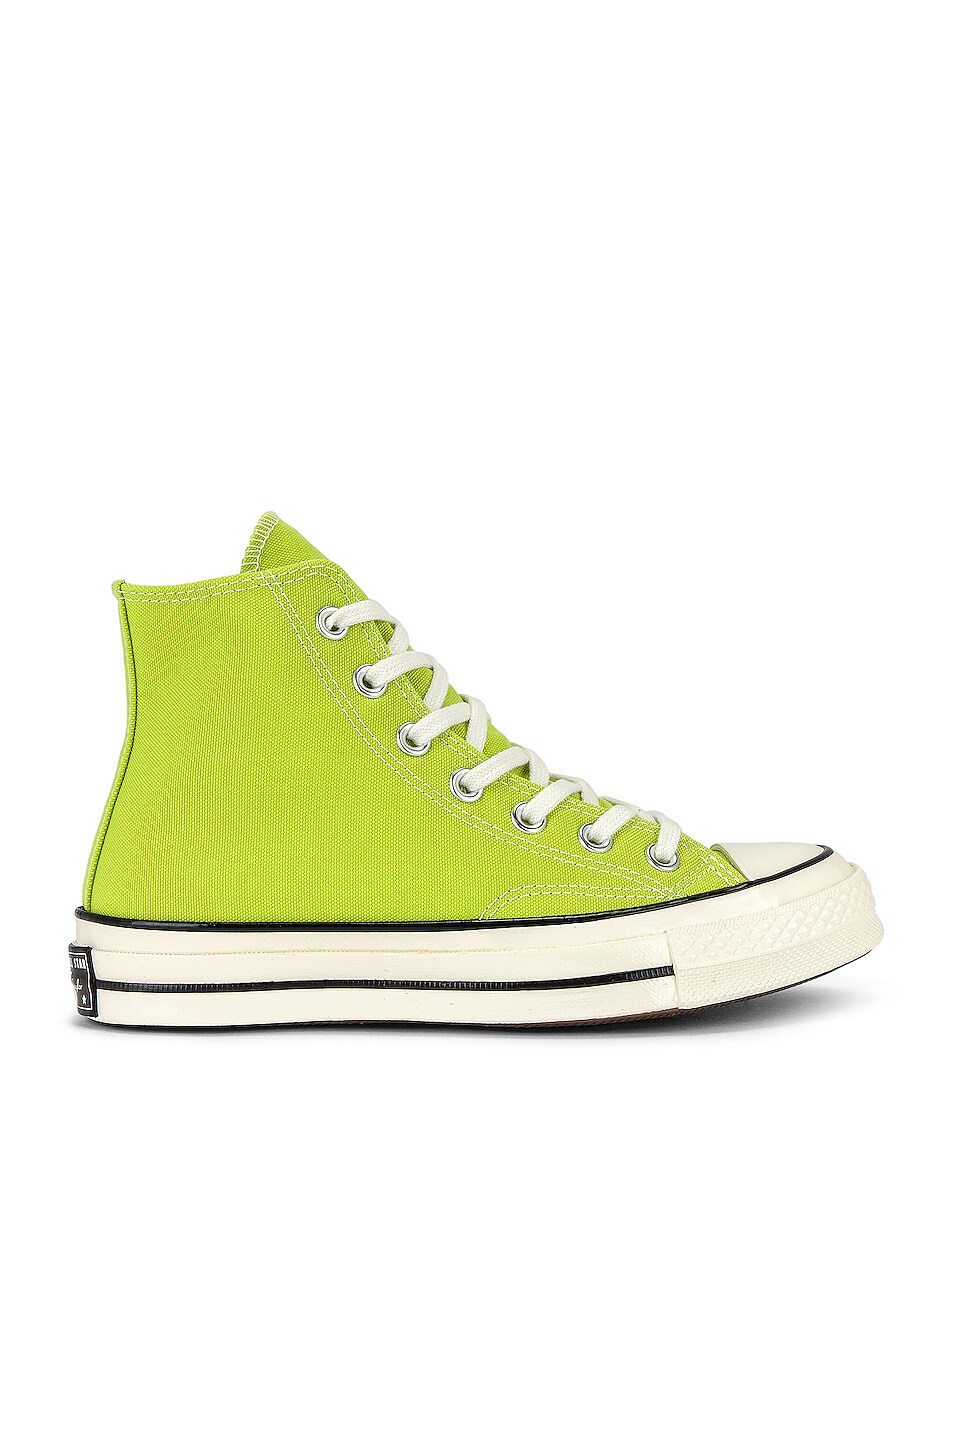 Image 1 of Converse Chuck 70 Hi Recycled Canvas in Lime Twist, Egret, & Black